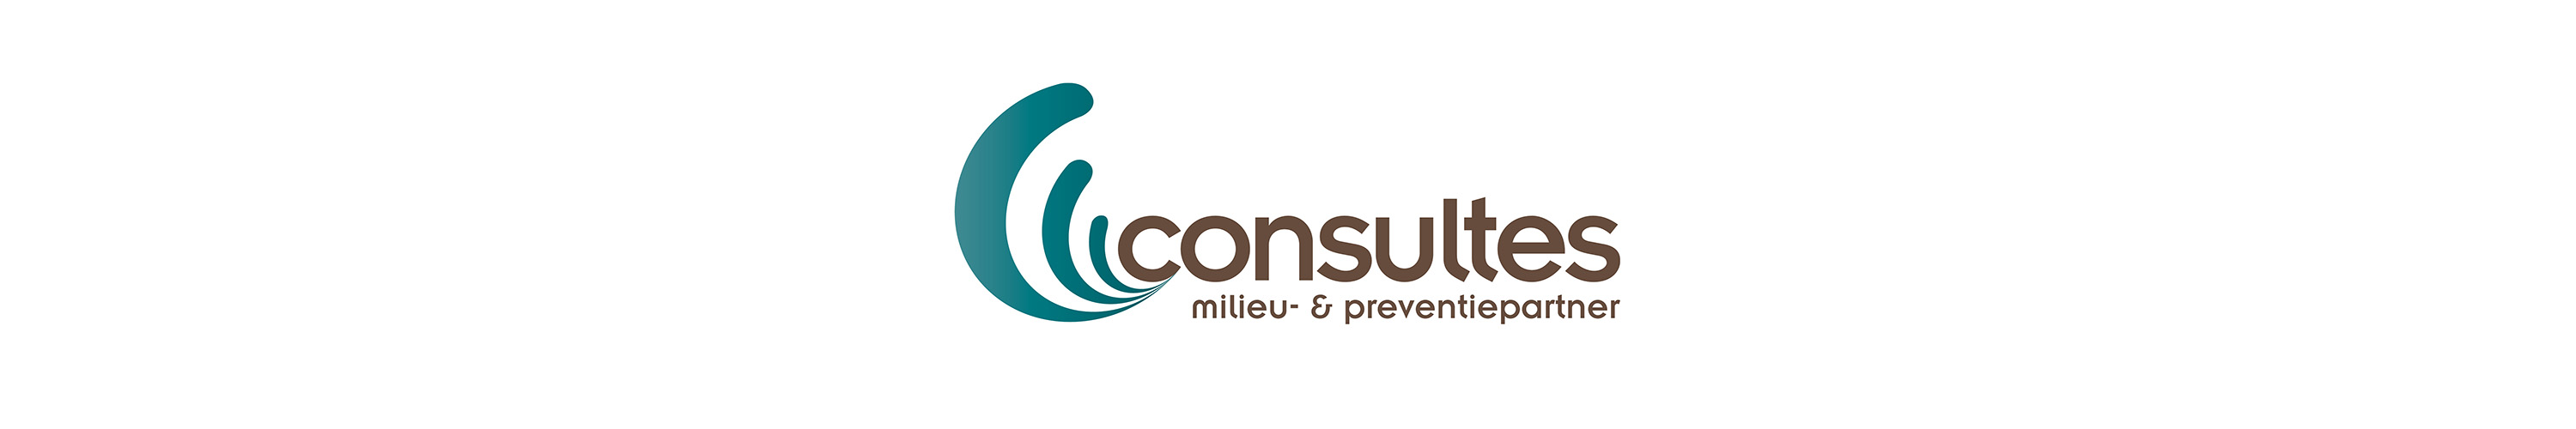 The Consultes logo